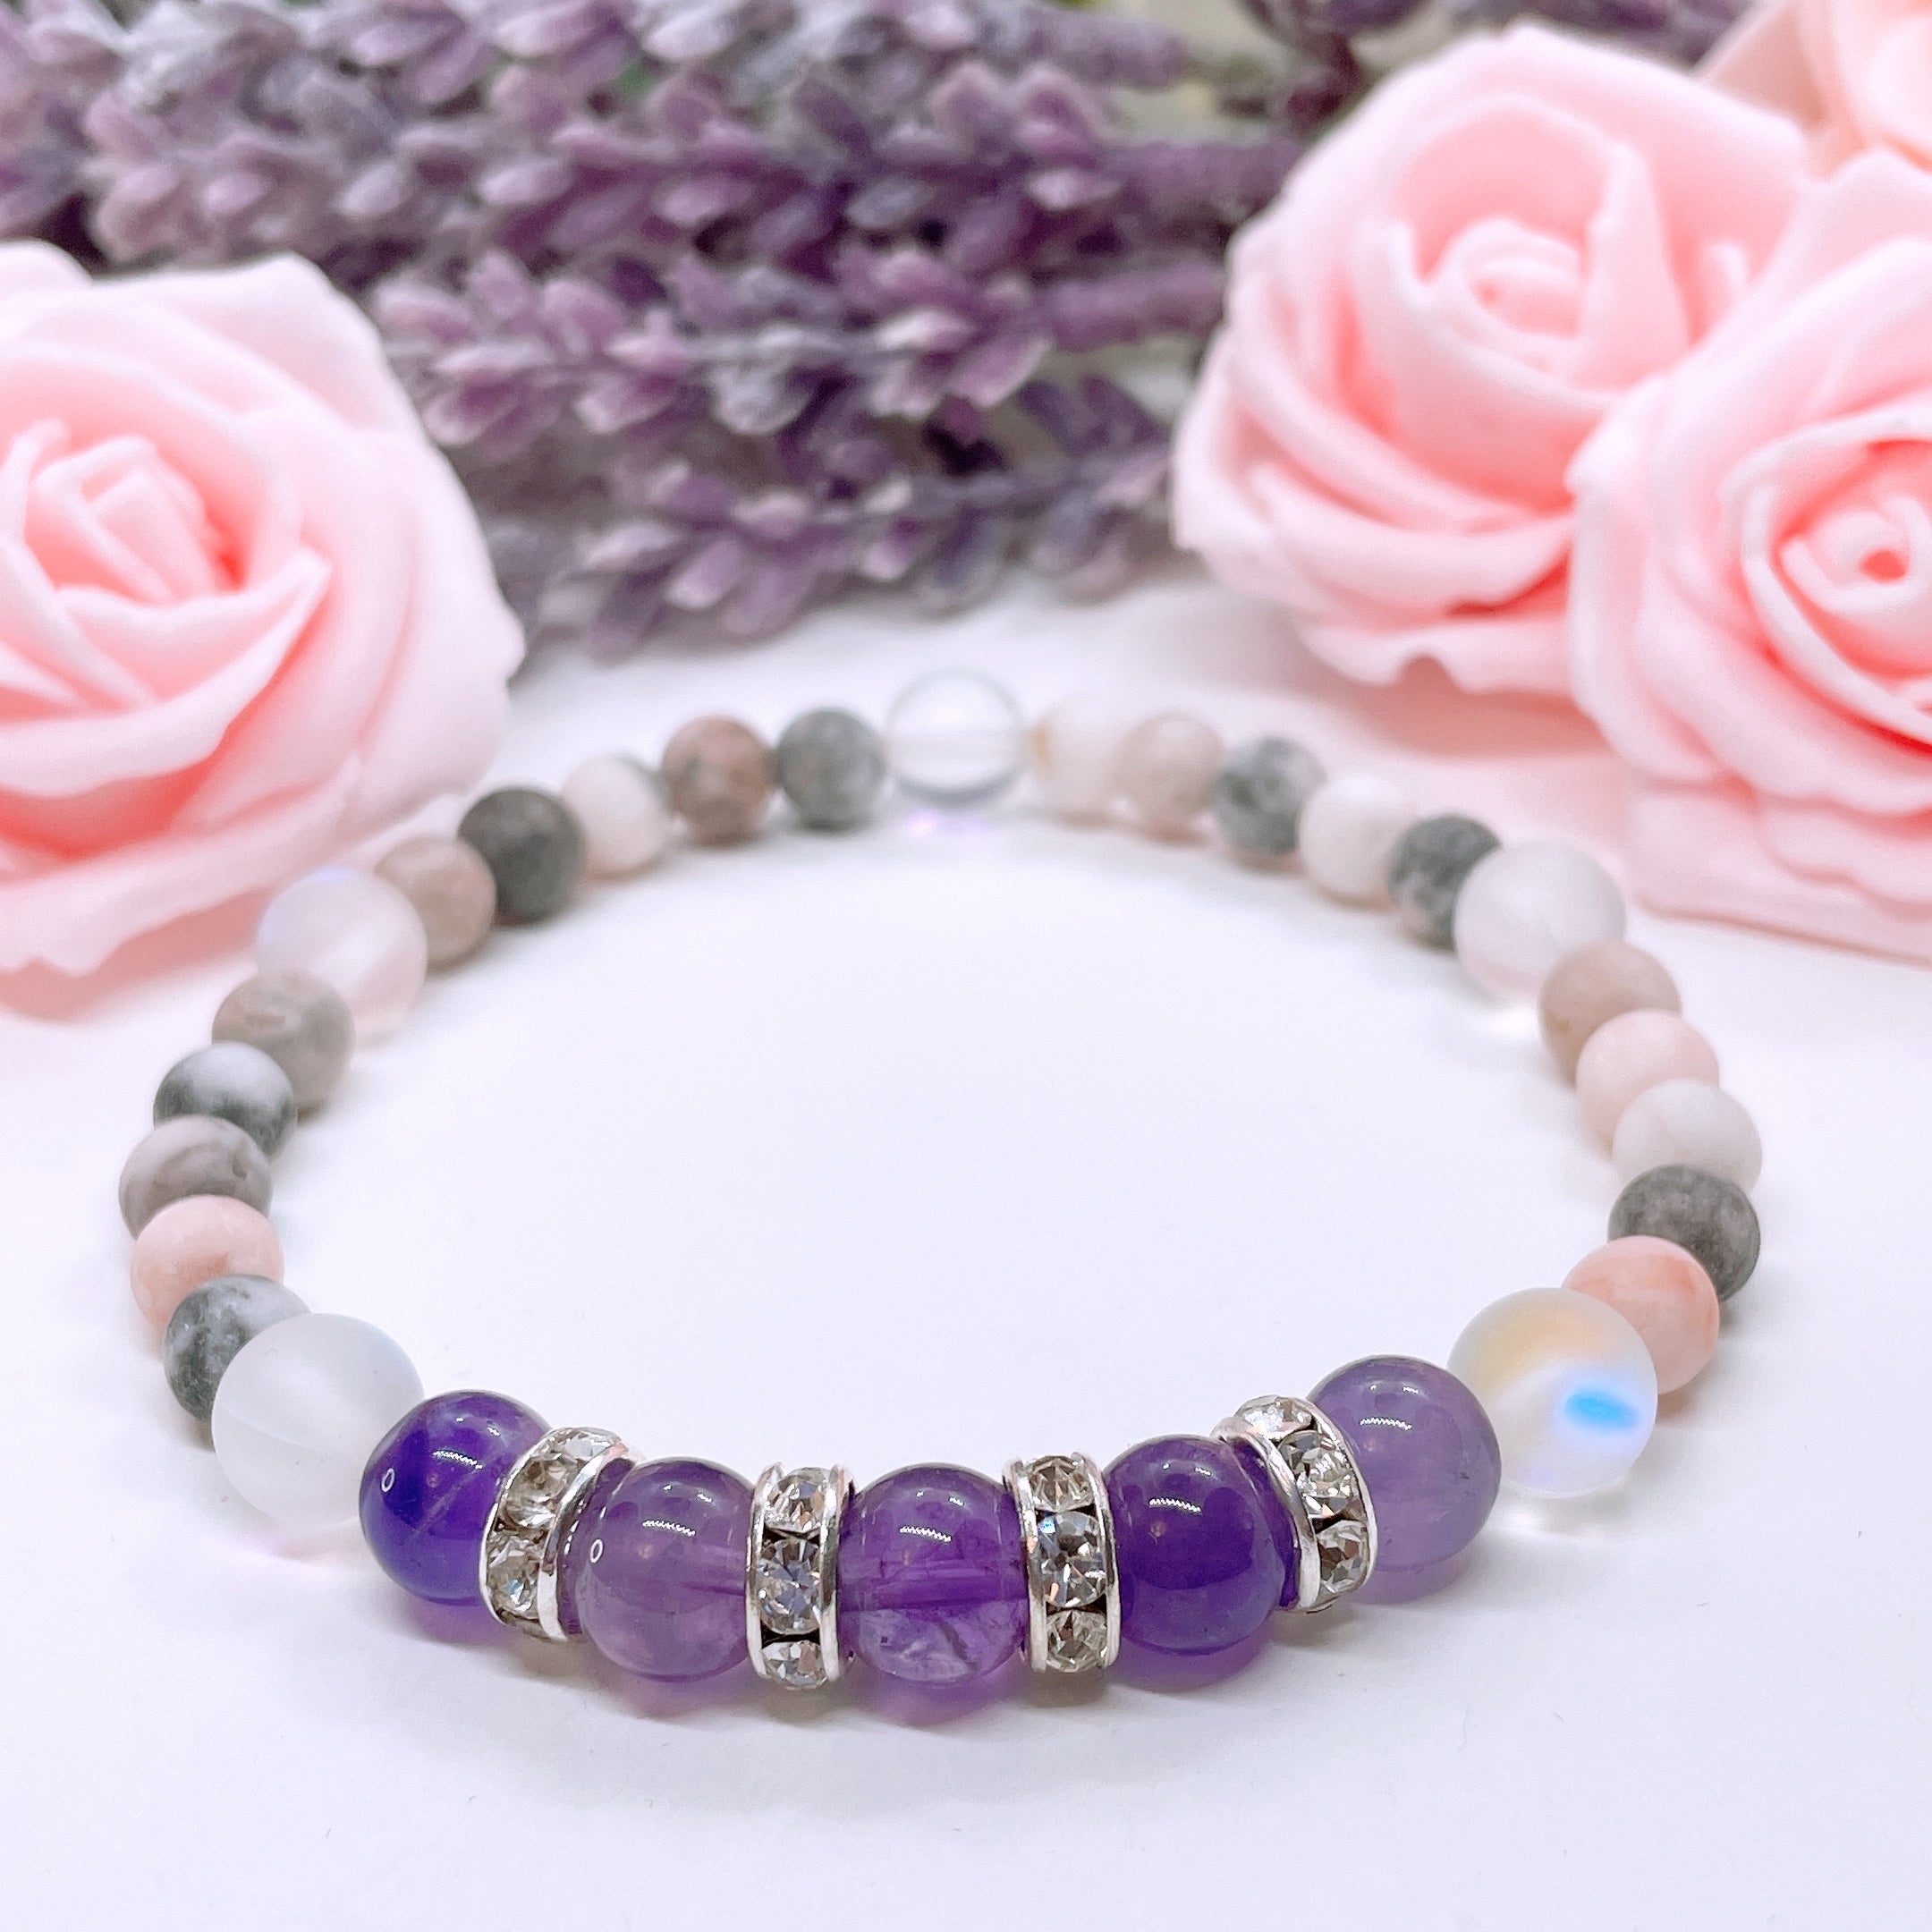 The Amethyst Rhinestone Companion Gemstone stretch bracelet made with 5 dark purple amethyst gemstones, translucent aura beads, and rhinestone accents for added sparkle sits on a white table. 